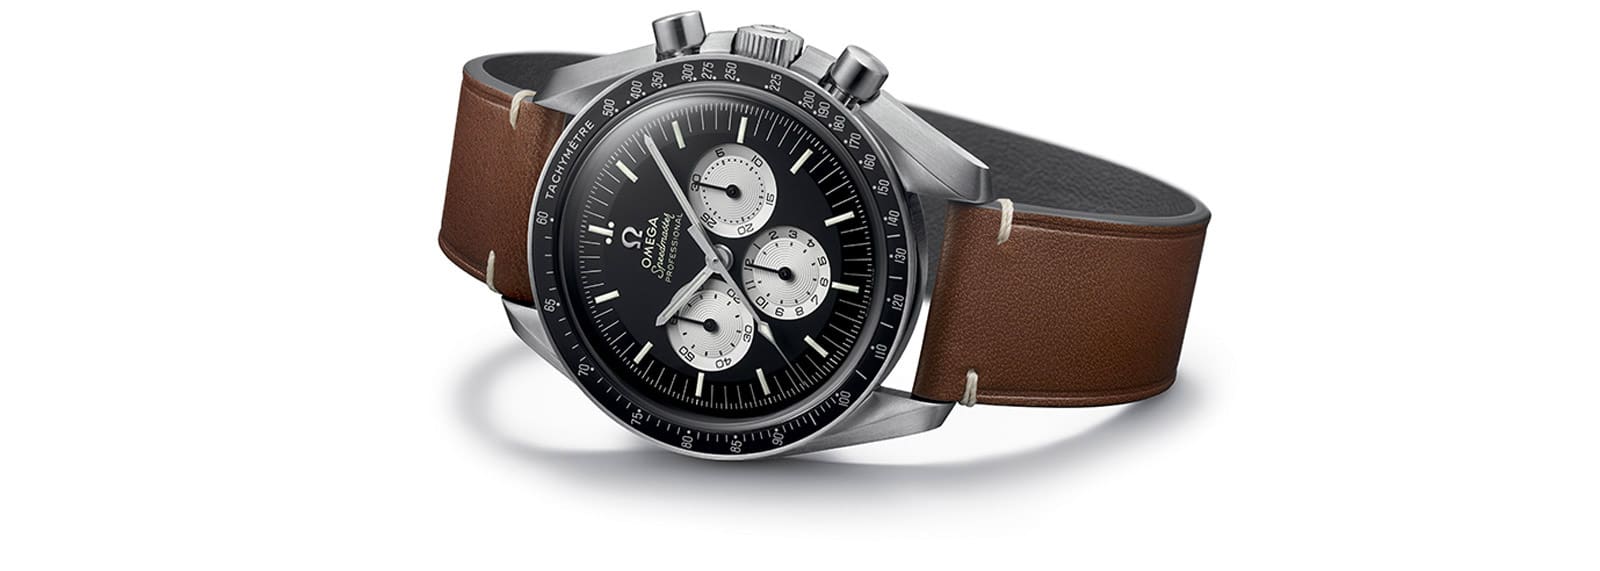 BREAKING: Omega announce hot inverse panda ‘Speedy Tuesday’ Speedmaster limited edition, to be sold exclusively online